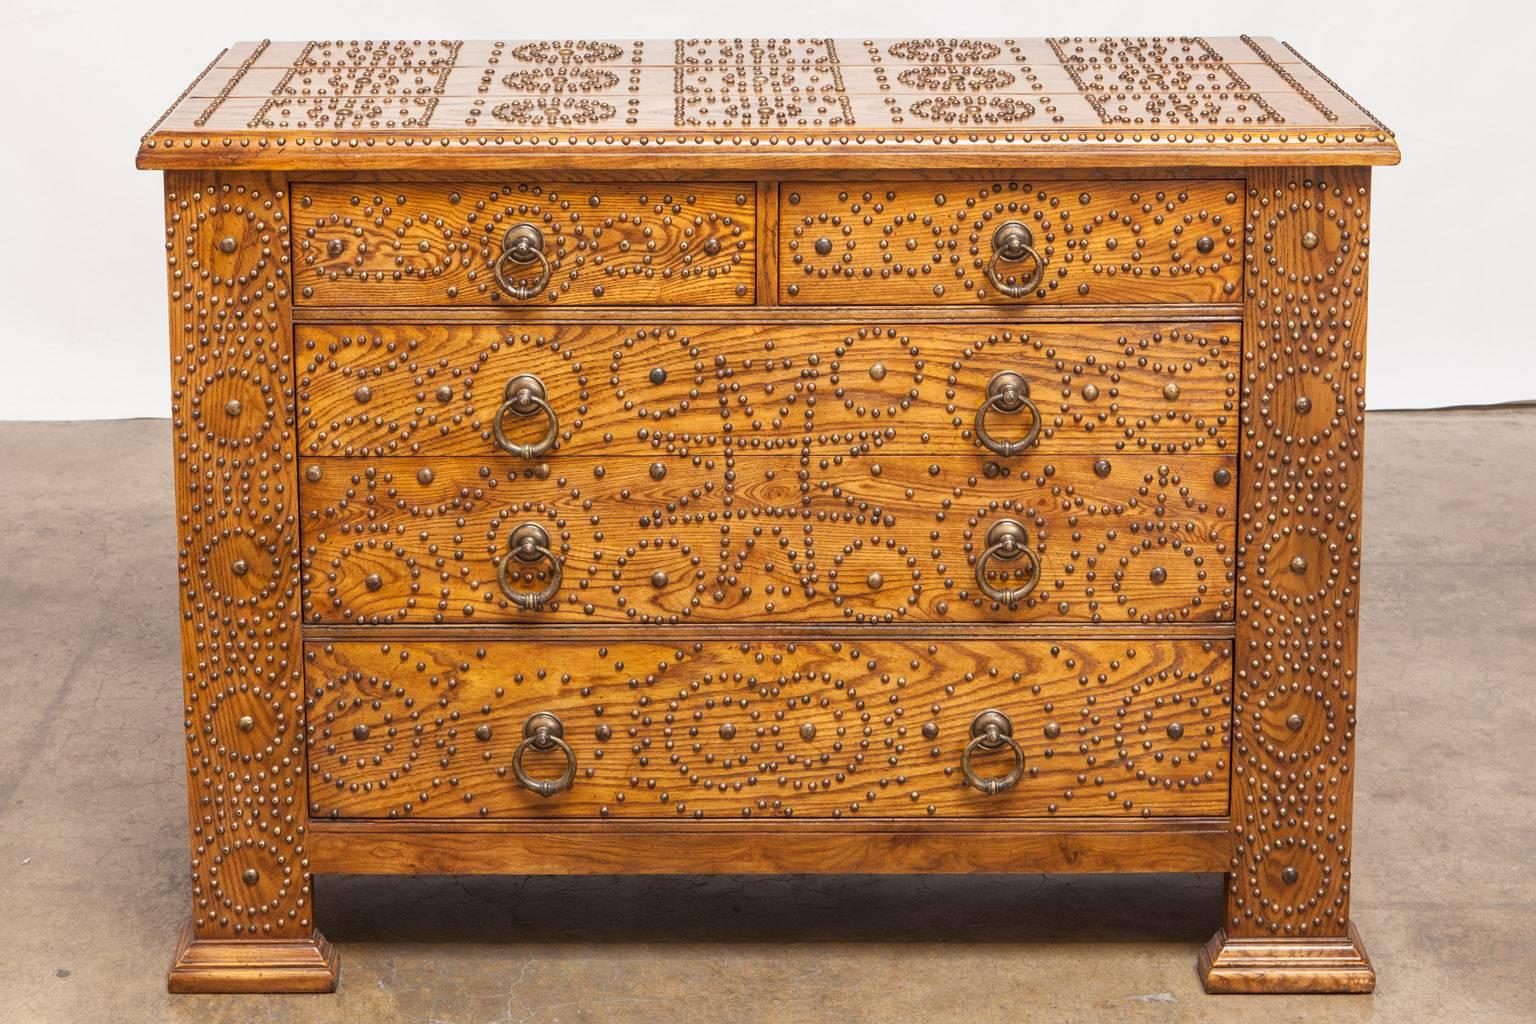 Fantastic oak chest of drawers featuring large brass studs decorating four sides with solid brass ring pulls. Fashioned after an African zanzibar strongbox chest, or dowry trunk this labor intensive style has a unique Folk Art whimsical look.